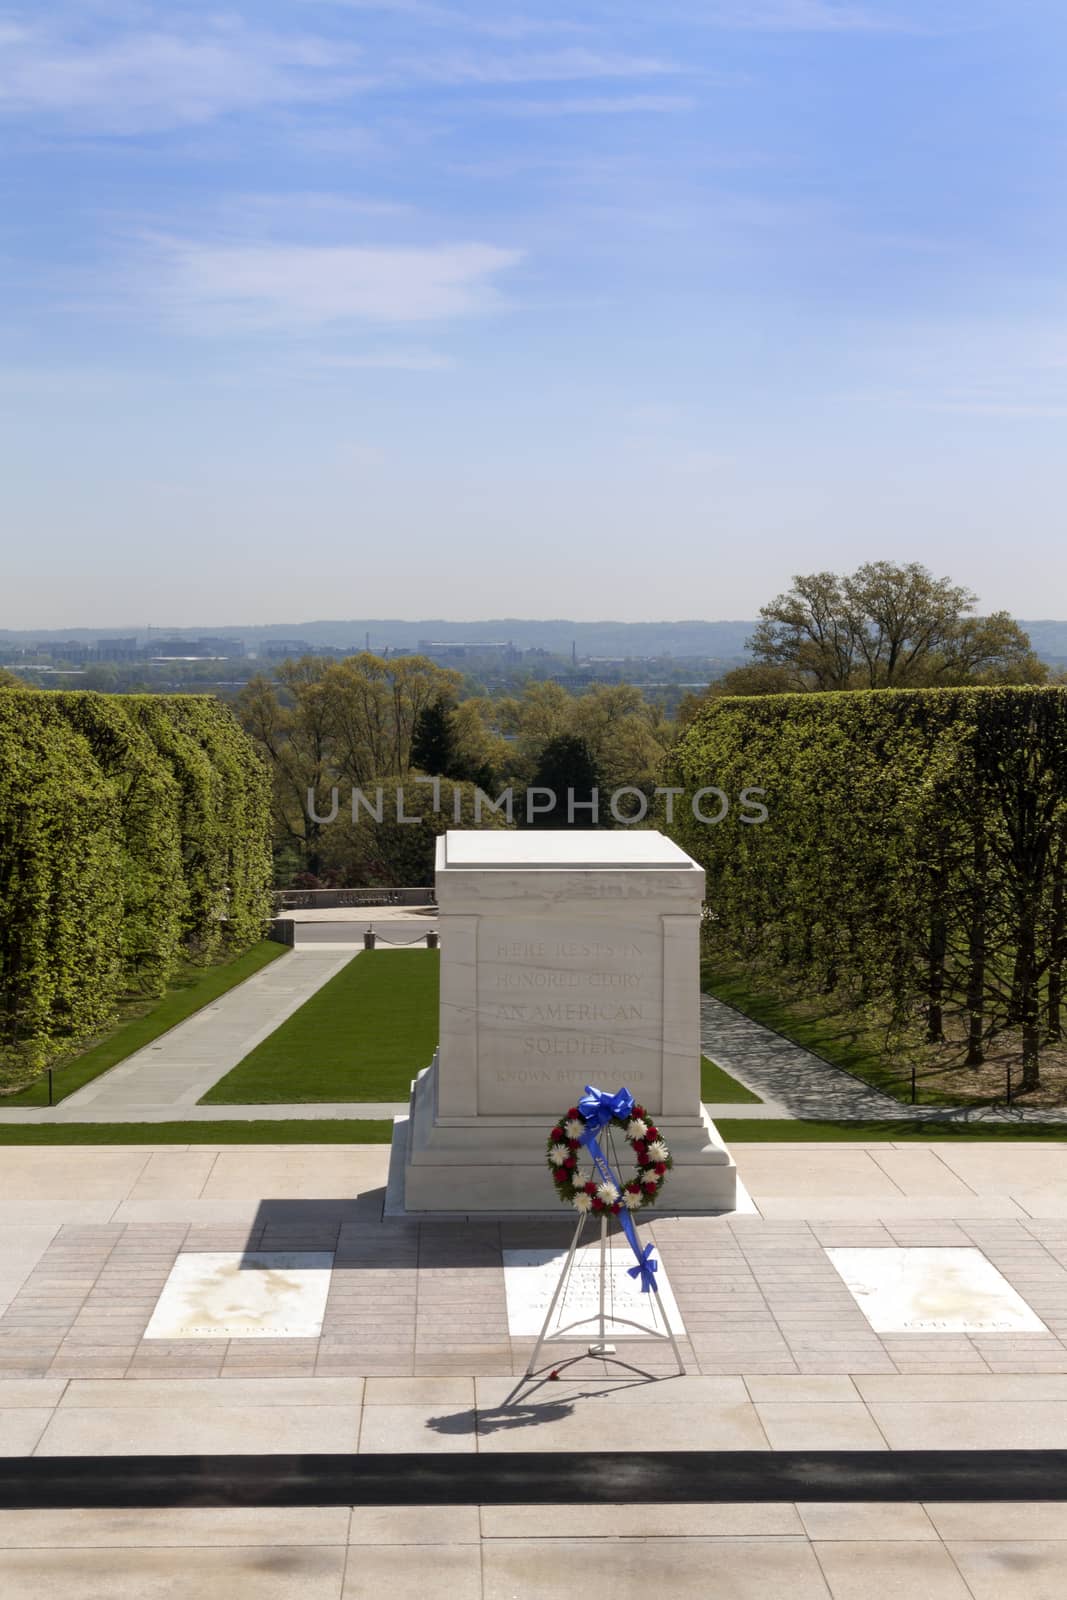 The tomb to unknown soldier in Arlington Cemetery in Virginia, USA